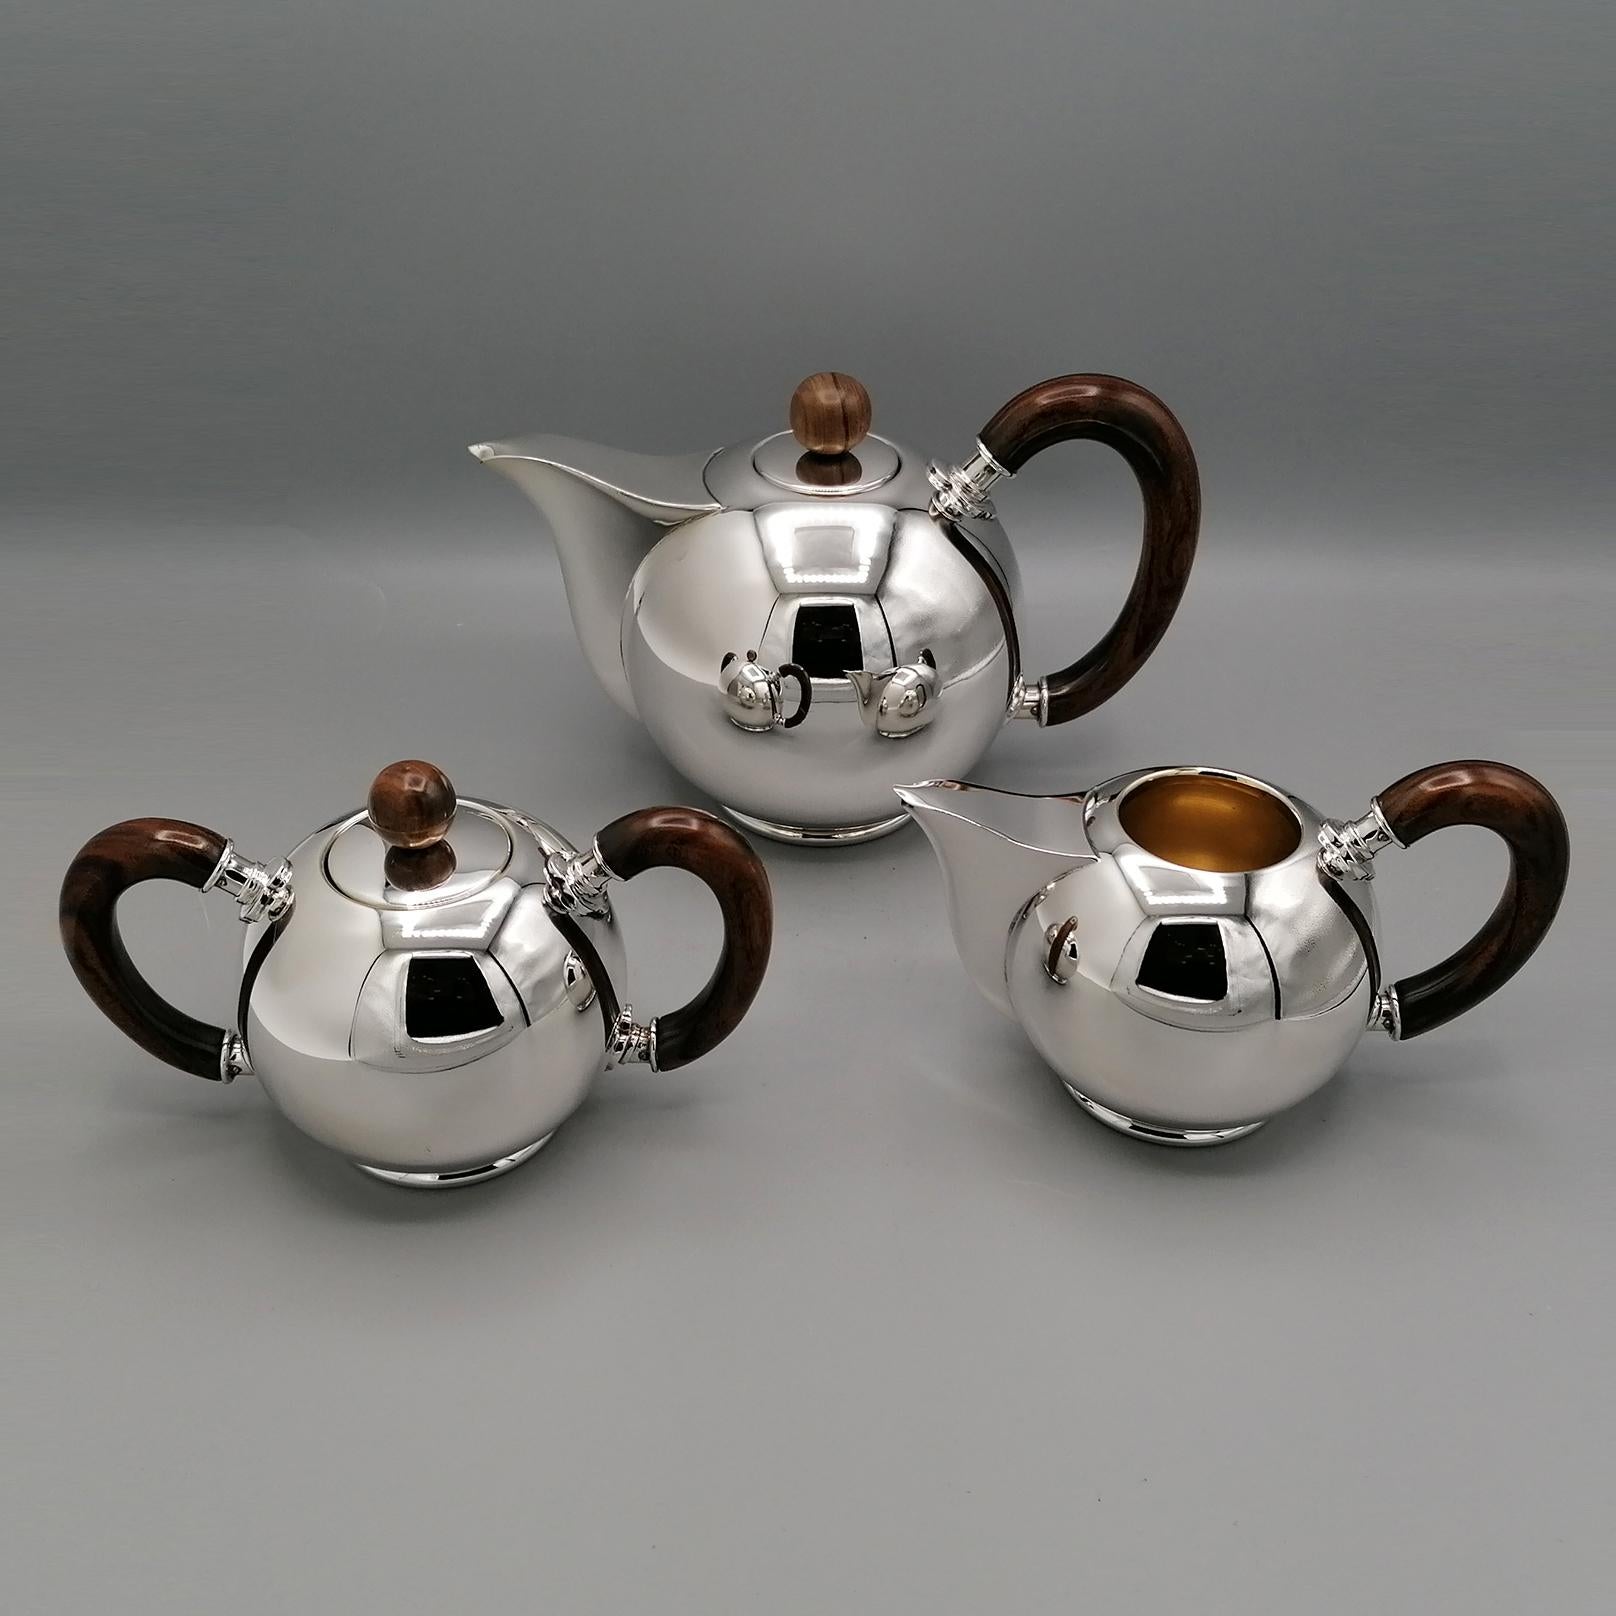 Completely handmade this Teaset is in sterling silver in a modern style with a spherical shape, shiny and essential shapes with handles and knobs in precious wood.
The teapot has a sterling silver lid with a wooden knob and a 